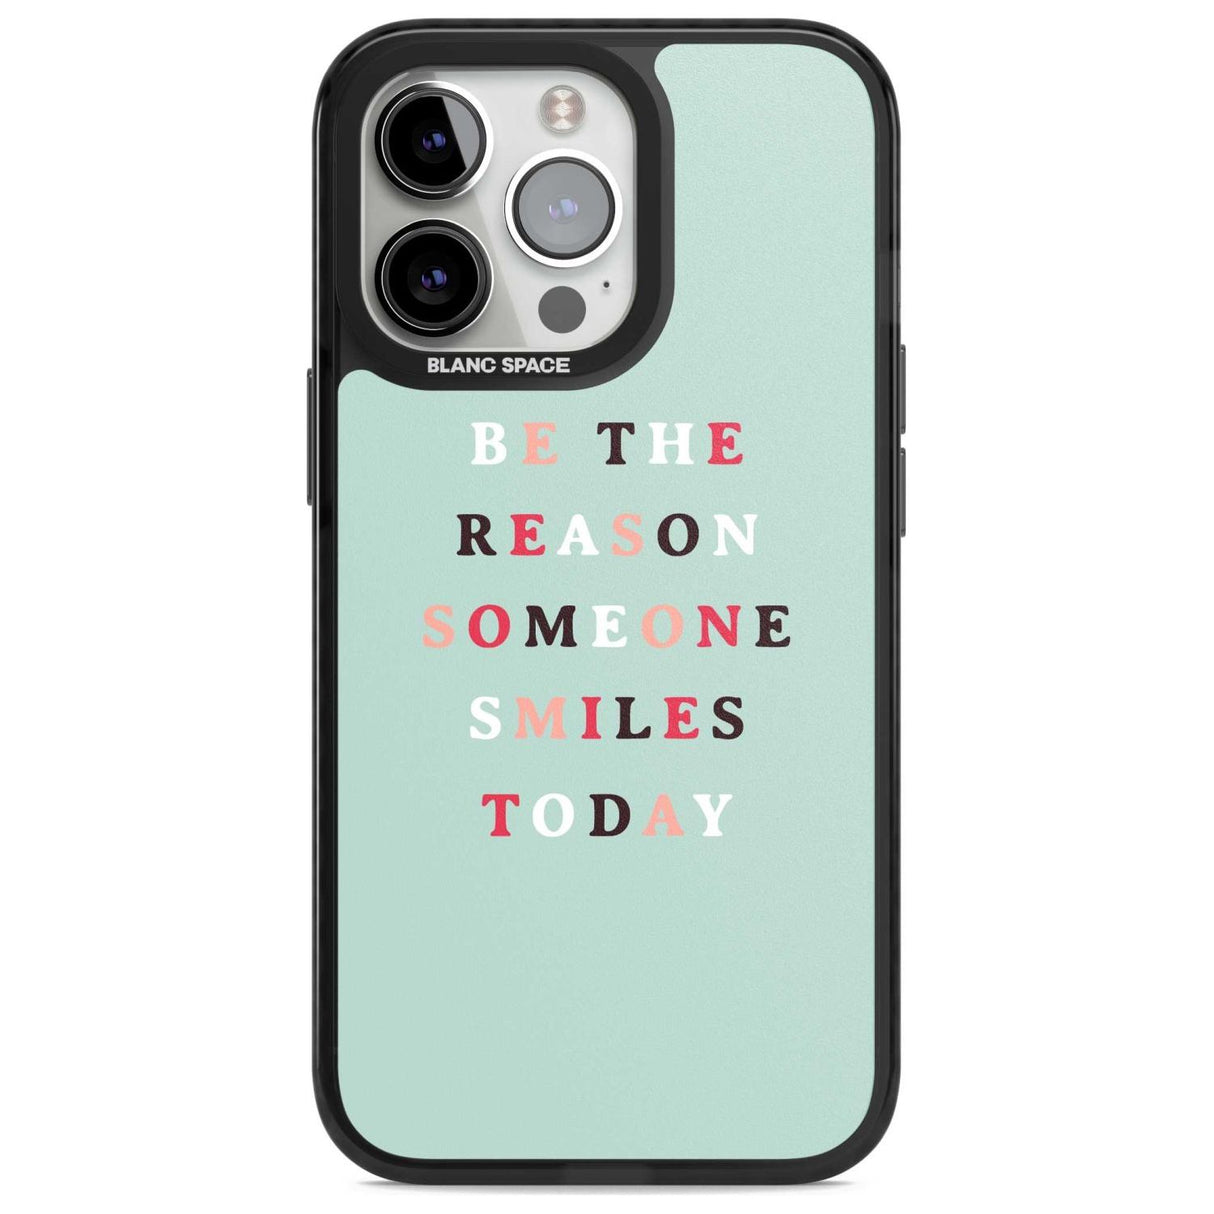 Be the reason someone smiles Phone Case iPhone 15 Pro Max / Magsafe Black Impact Case,iPhone 15 Pro / Magsafe Black Impact Case,iPhone 14 Pro Max / Magsafe Black Impact Case,iPhone 14 Pro / Magsafe Black Impact Case,iPhone 13 Pro / Magsafe Black Impact Case Blanc Space